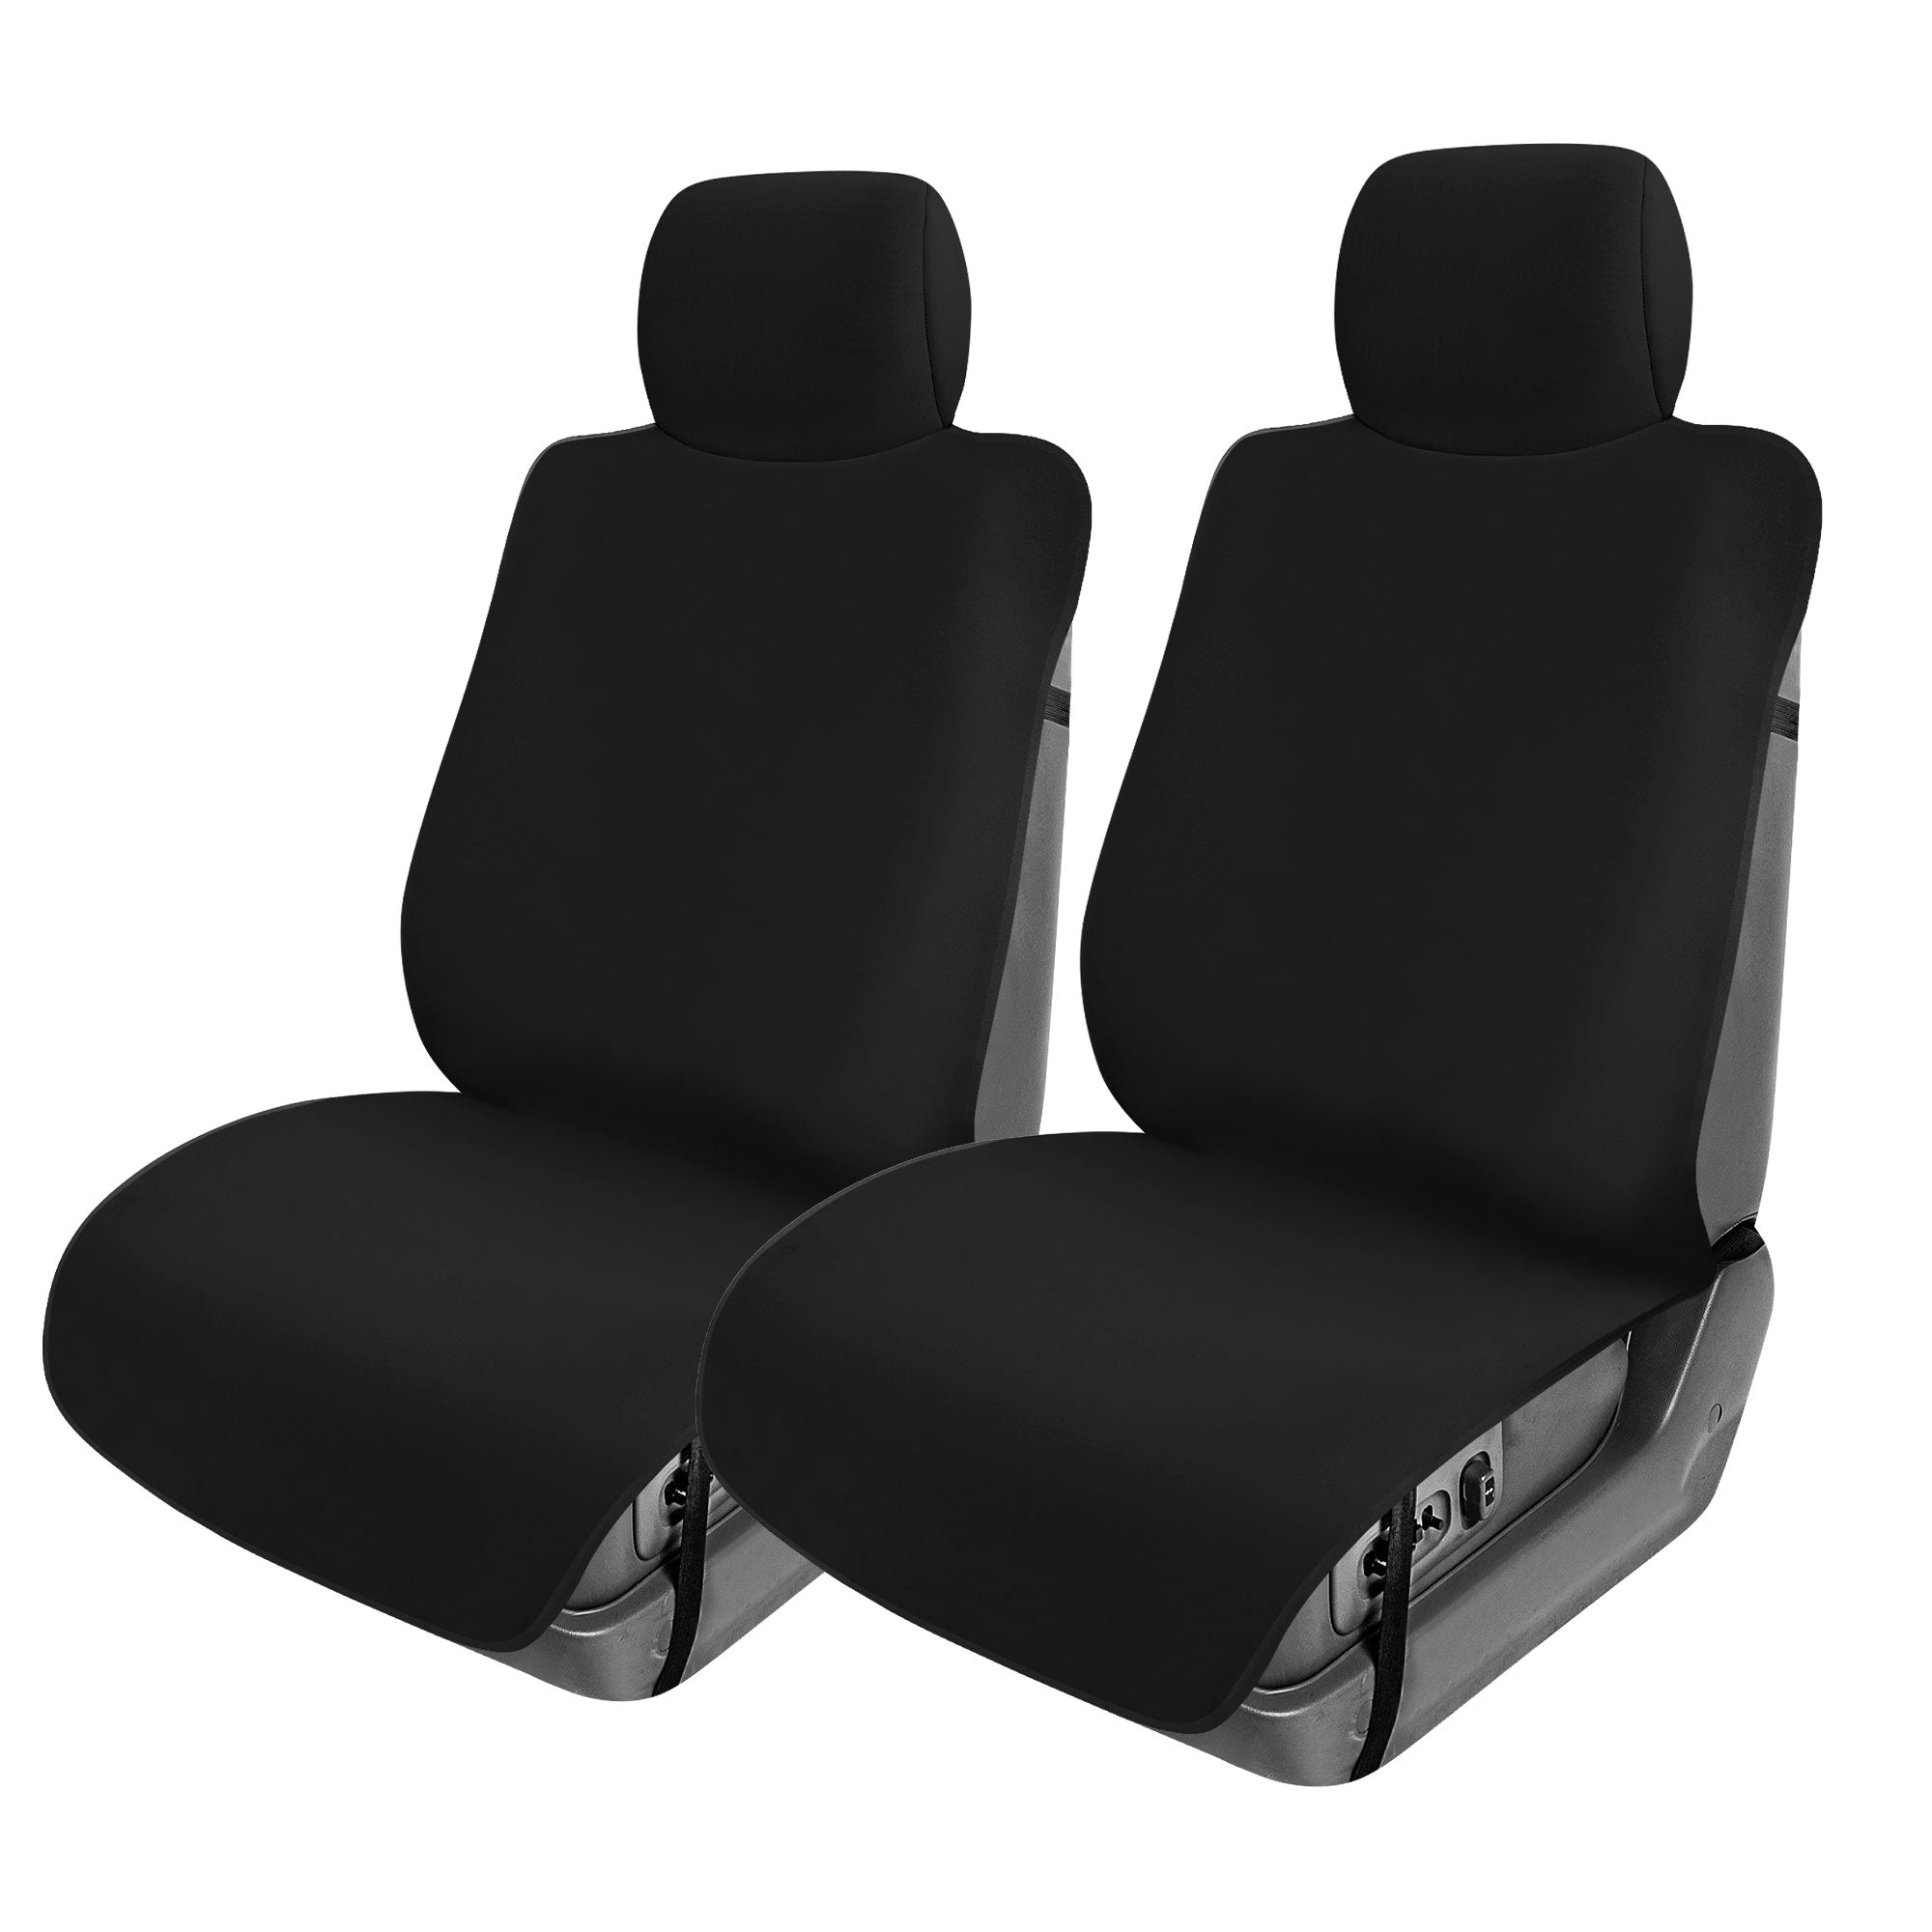 FH Group Easy Roll-Out Car Seat Protector - 2pc Black Neoprene